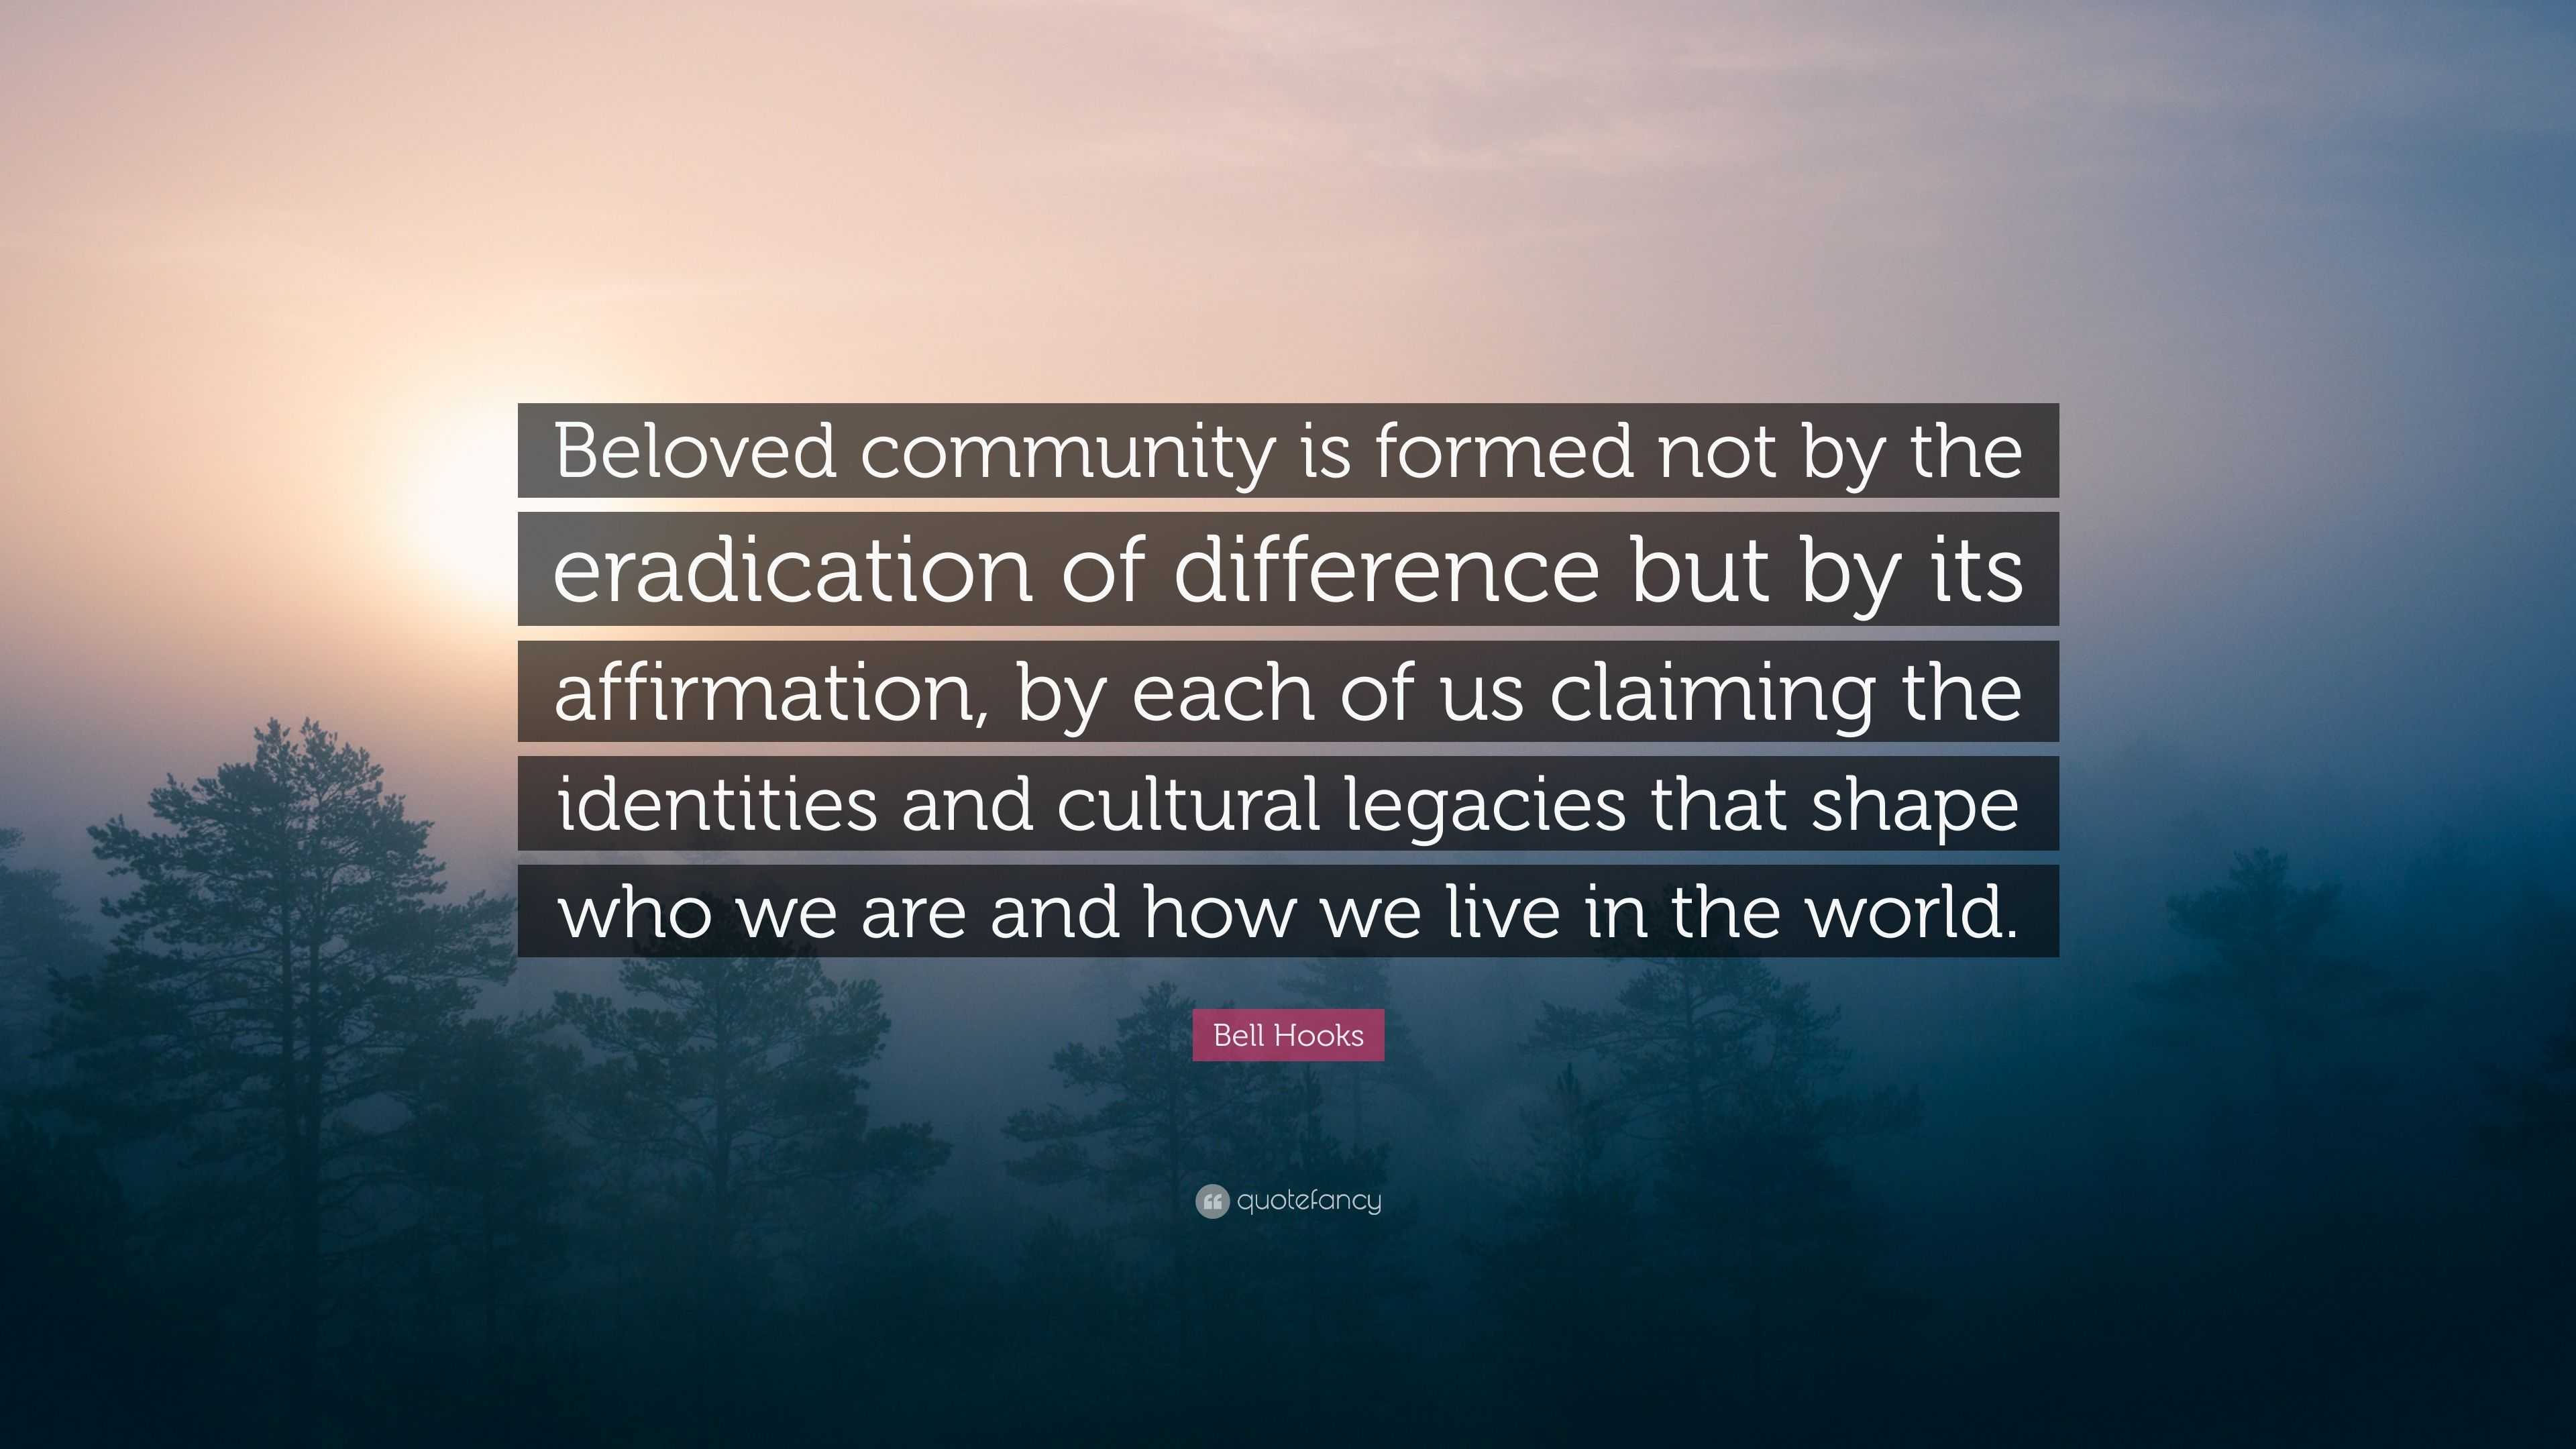 Bell Hooks Quote: “Beloved community is formed not by the eradication